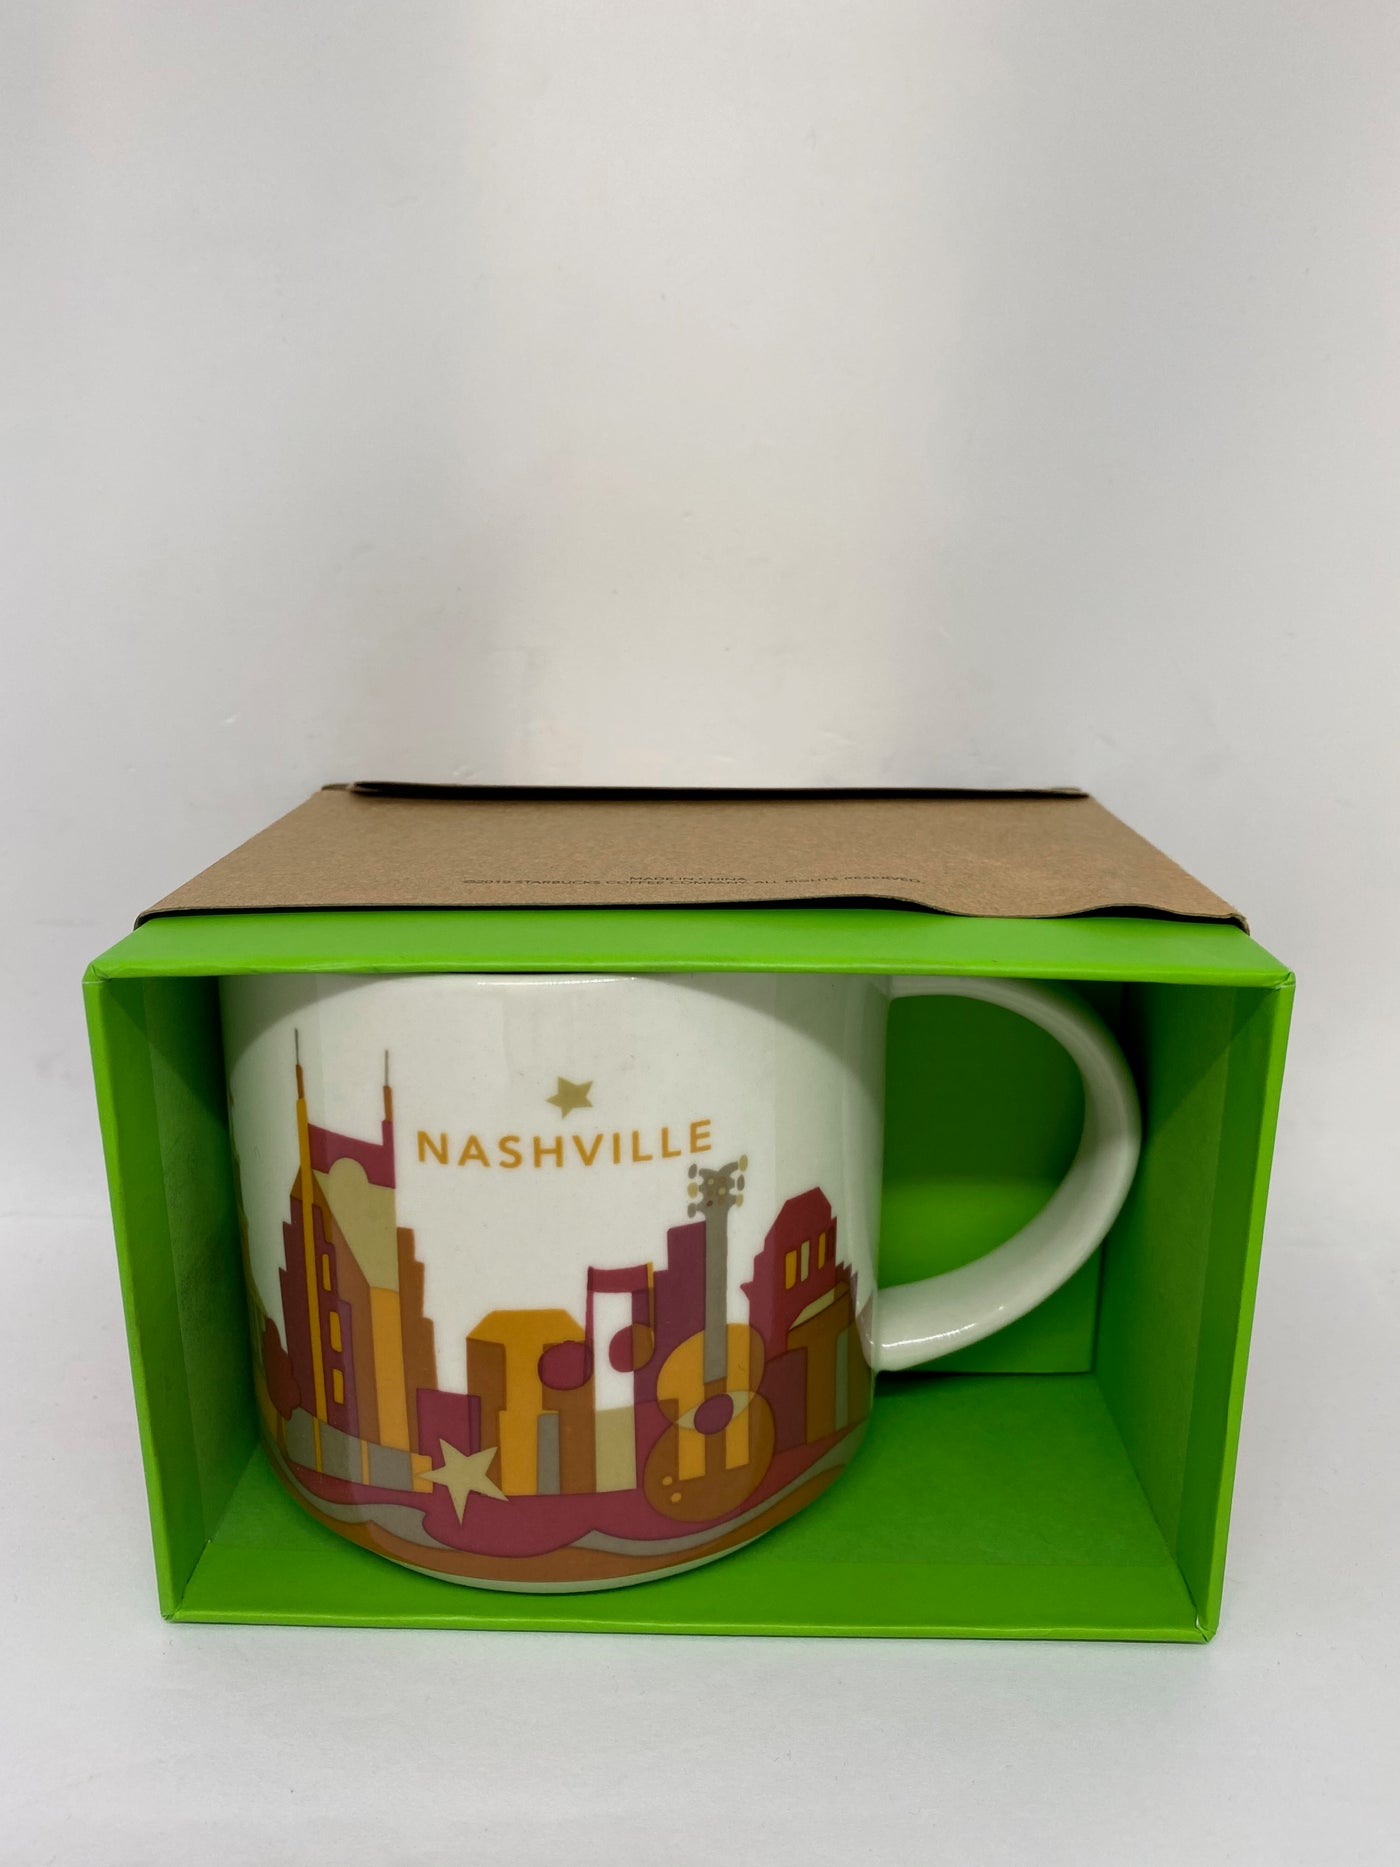 Starbucks You Are Here Nashville Tennessee Ceramic Coffee Mug New With Box